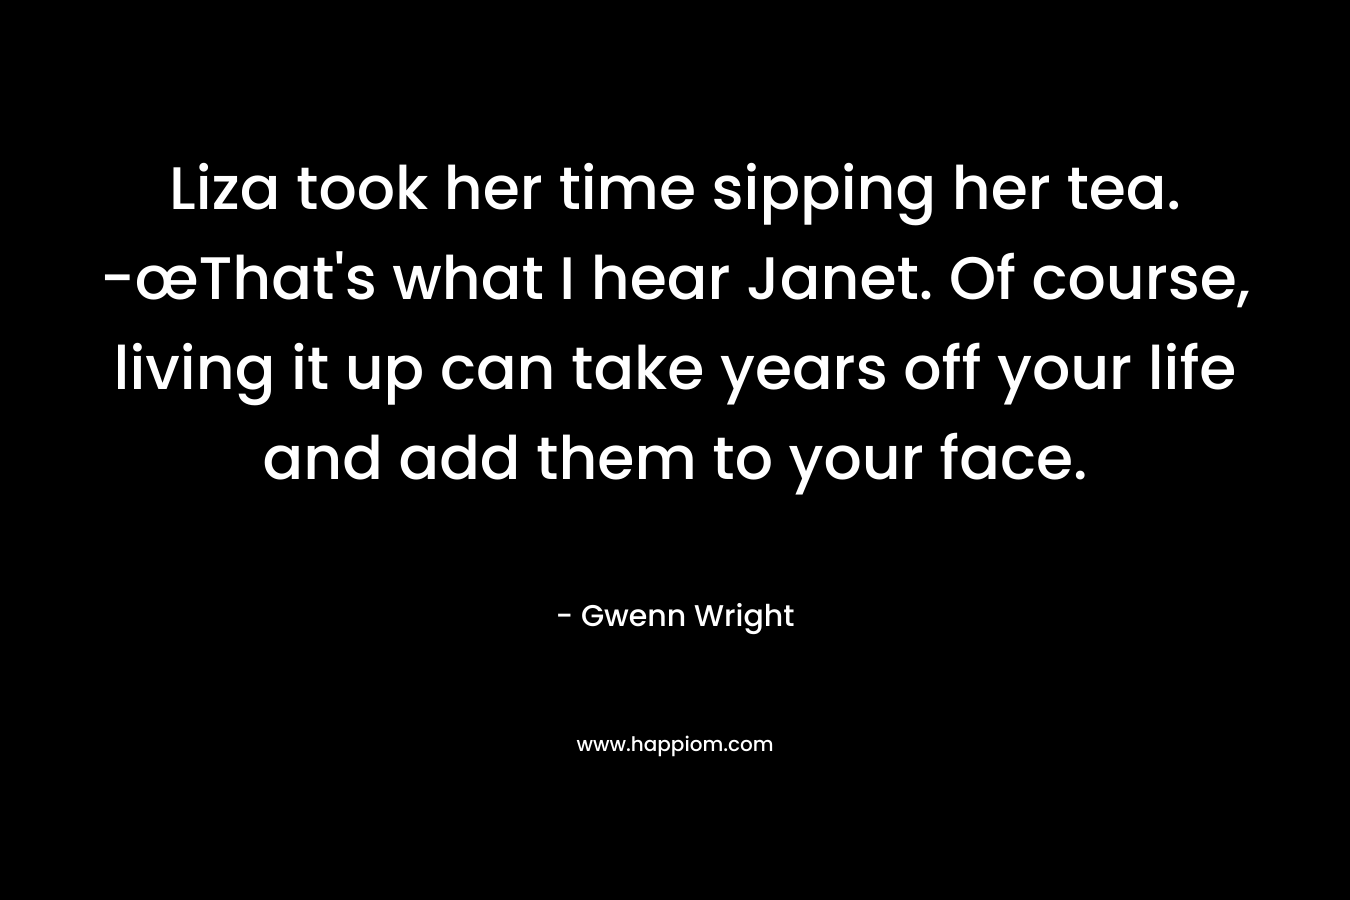 Liza took her time sipping her tea. -œThat’s what I hear Janet. Of course, living it up can take years off your life and add them to your face. – Gwenn Wright